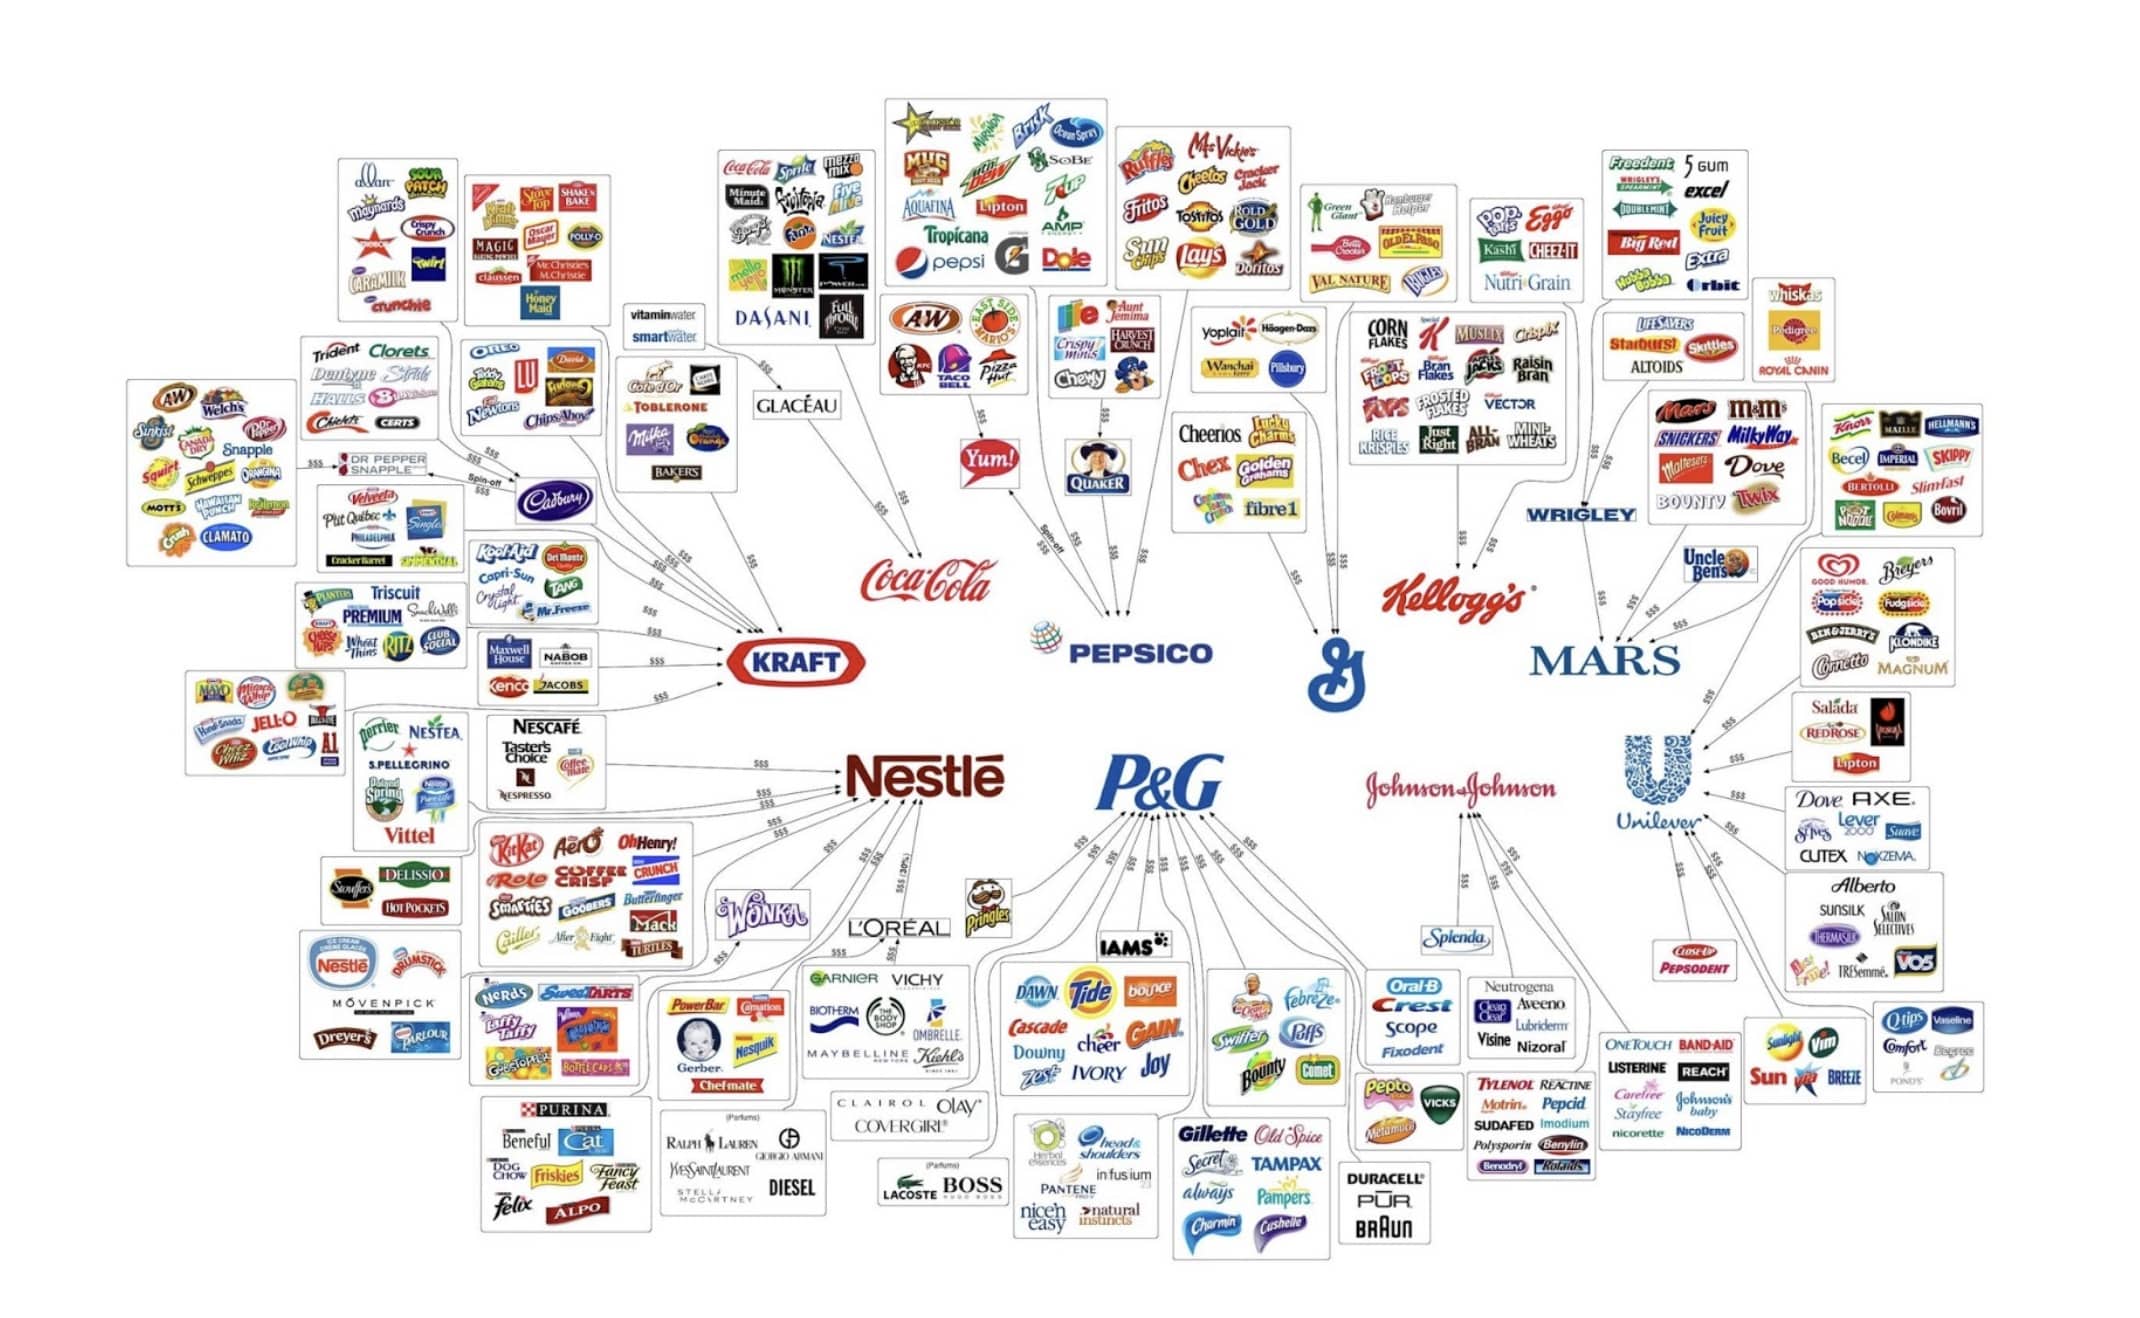 Consolidation in the Food System